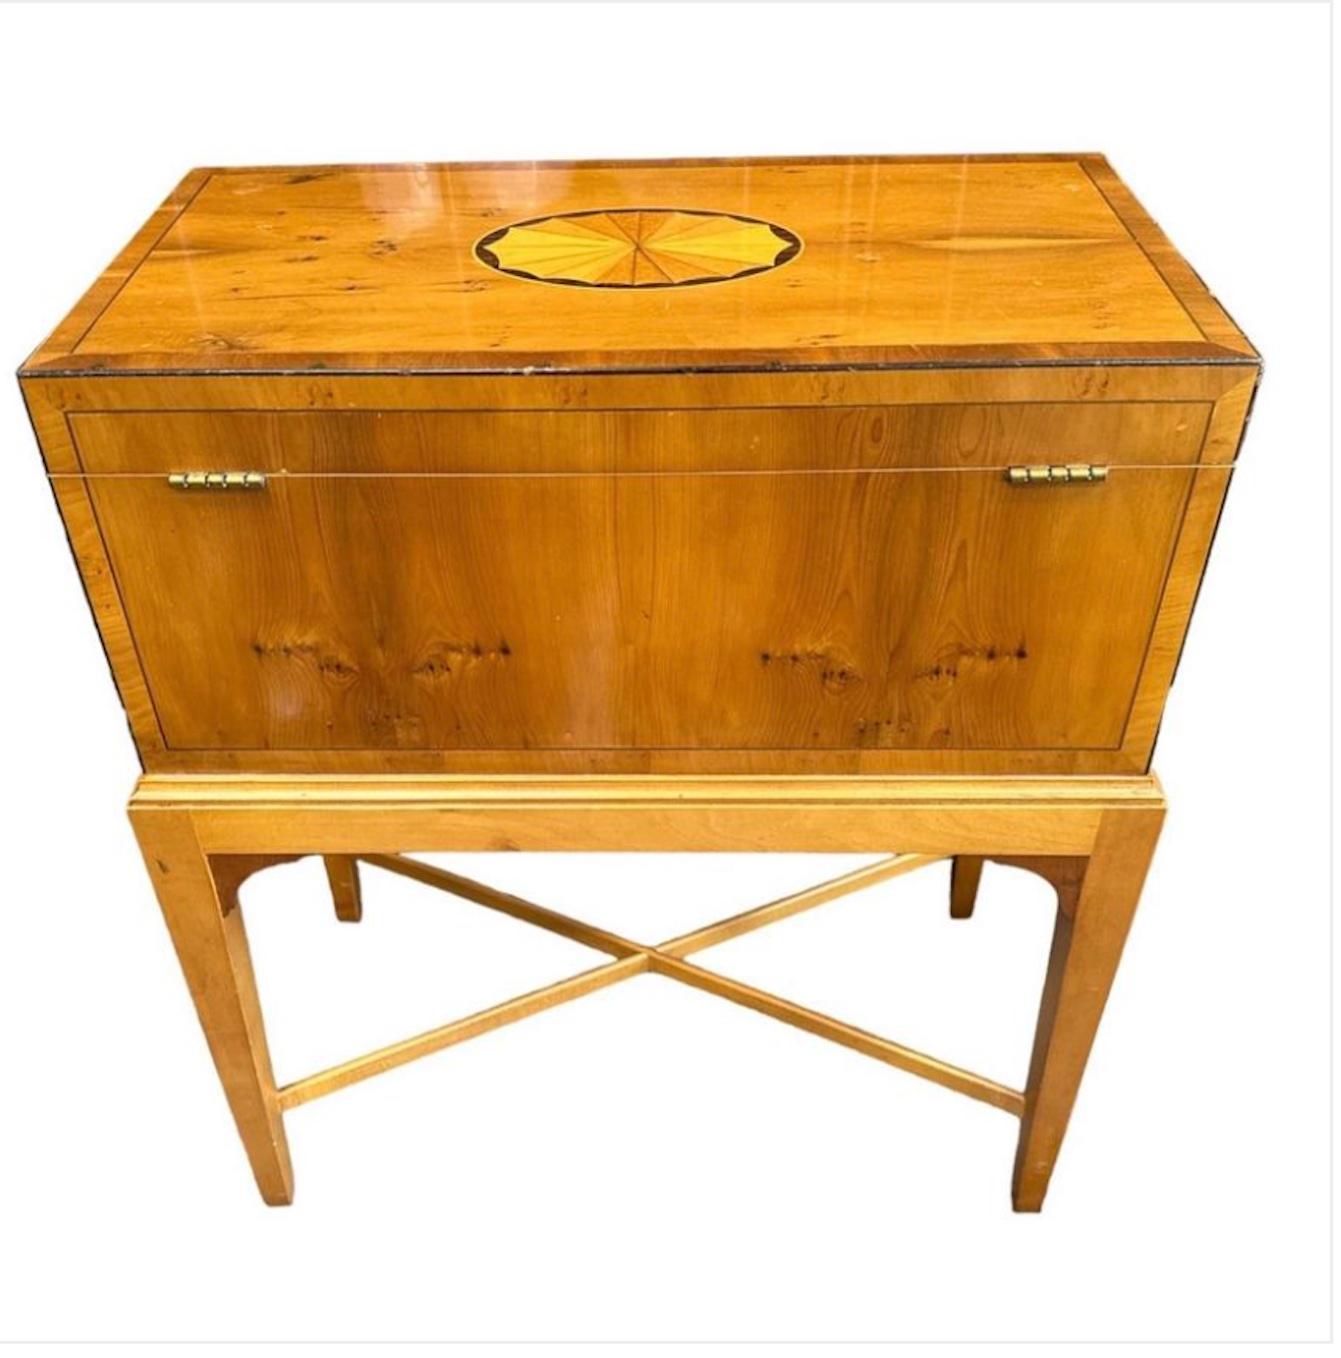 Baker Furniture Side Table Or Humidor. Satinwood With Inlay. 1